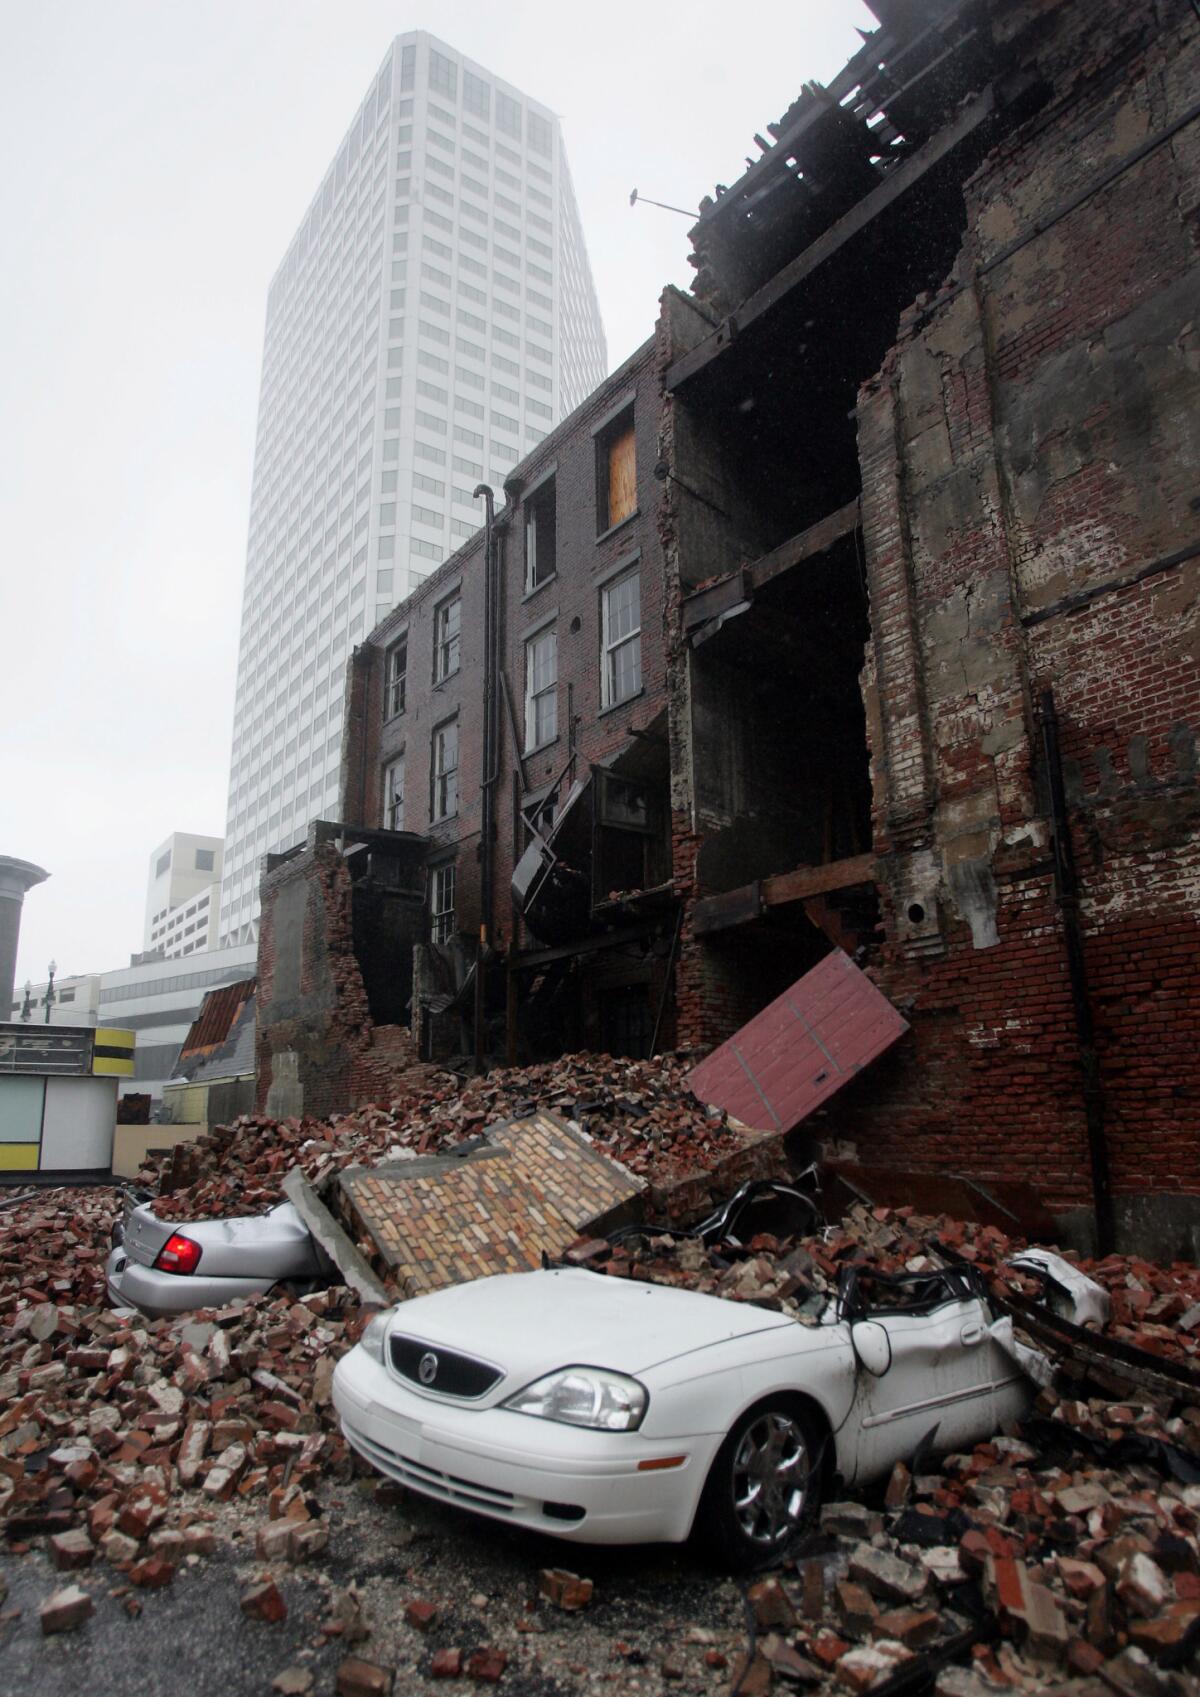 Debris from a fallen building covers streets in downtown New Orleans. (Dave Martin / Associated Press)